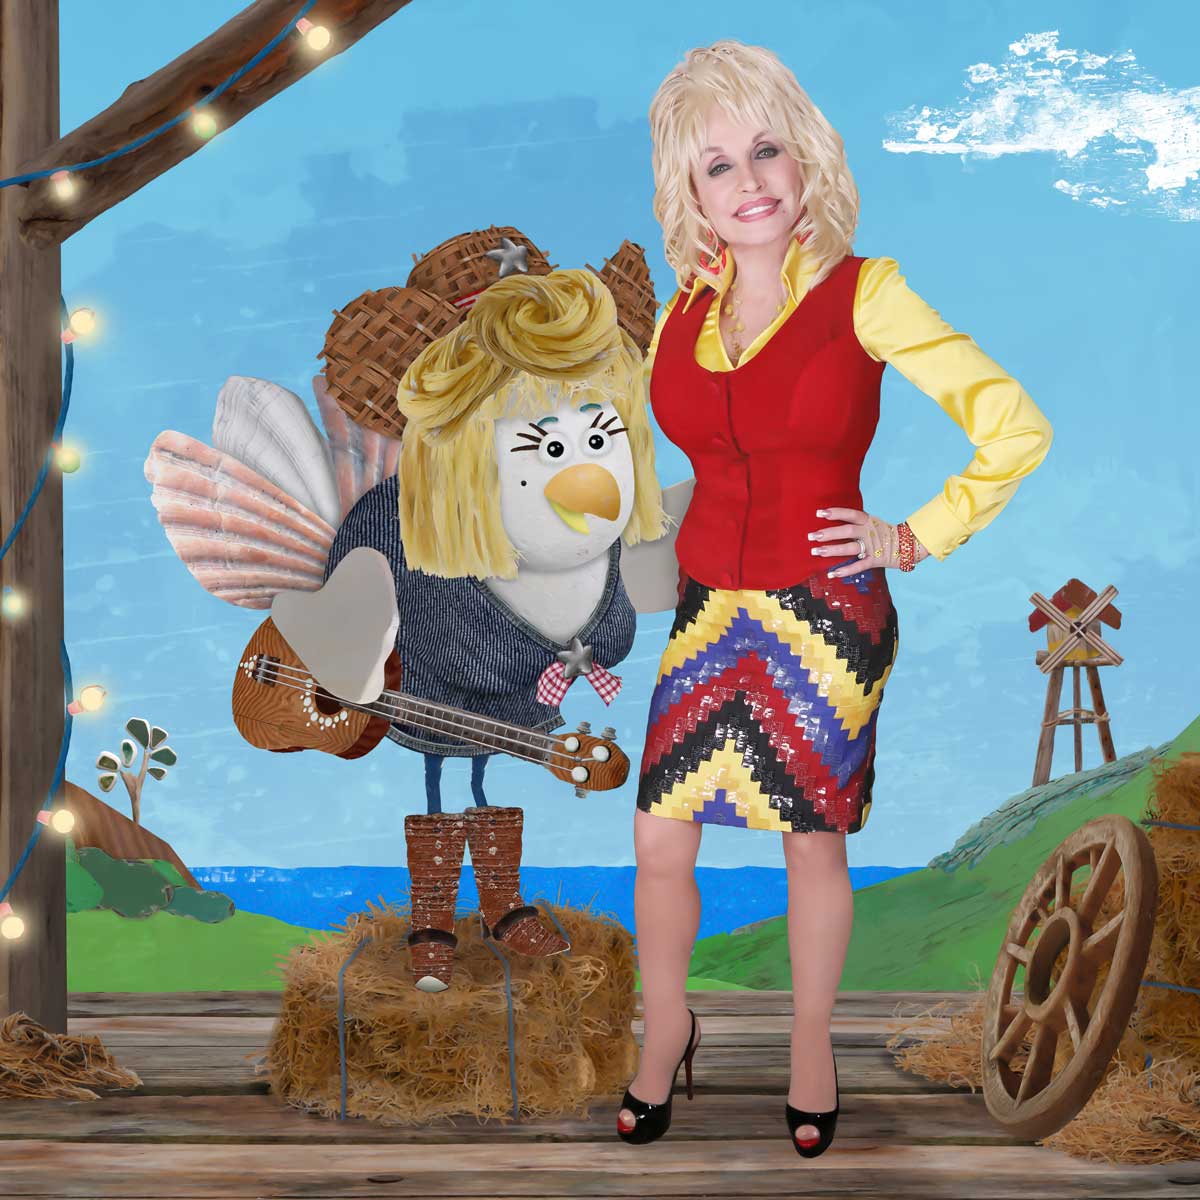 Dolly Parton As Noleen On "Lily's Driftwood Bay"